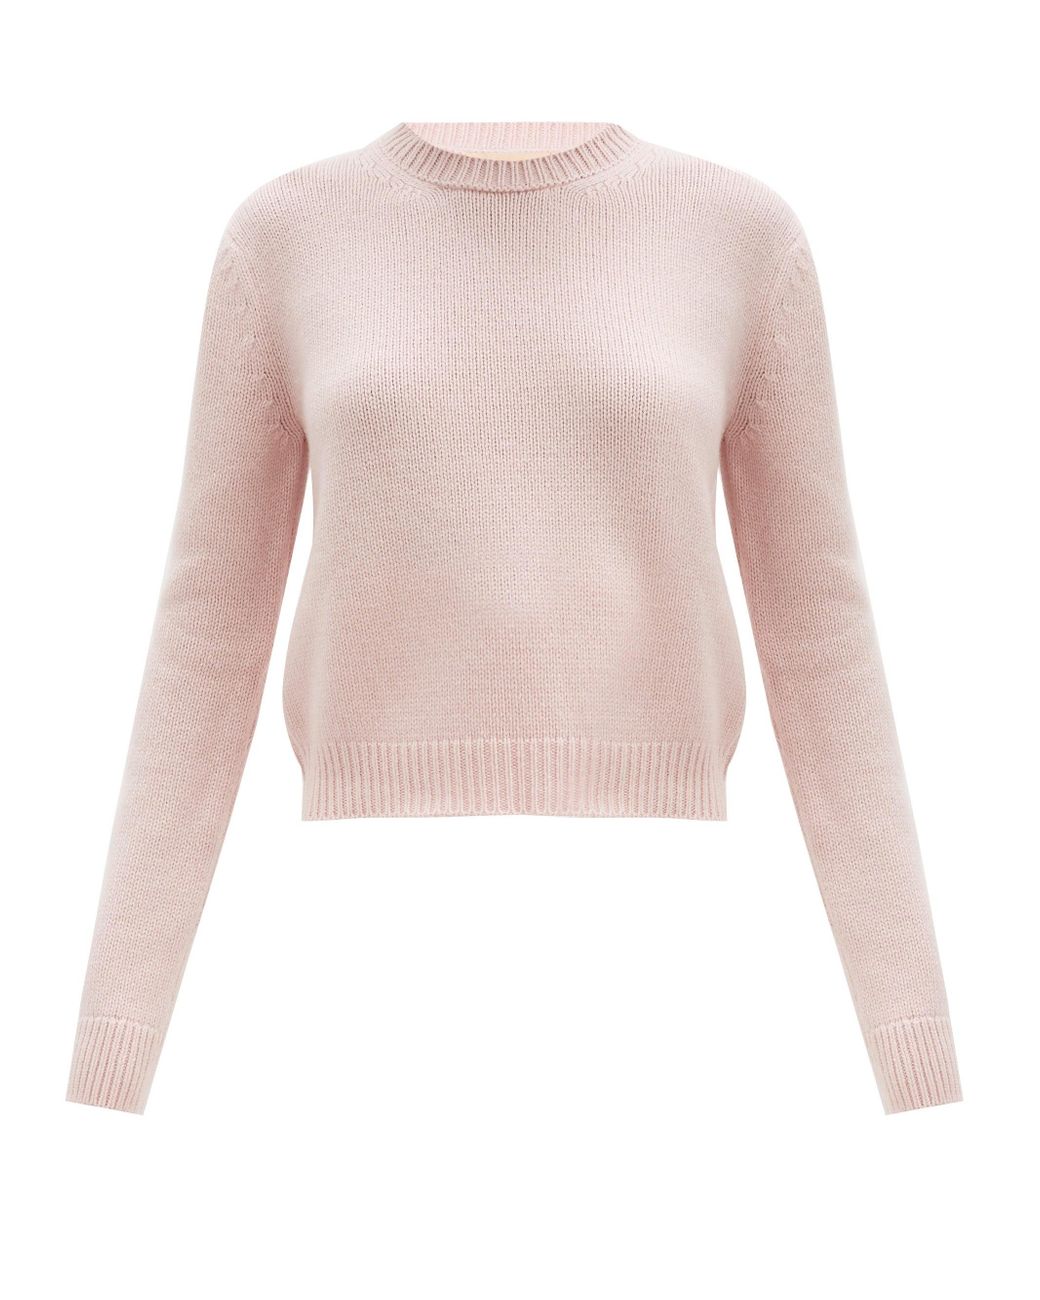 Brock Collection Crew-neck Cashmere Sweater in Light Pink (Pink) - Lyst